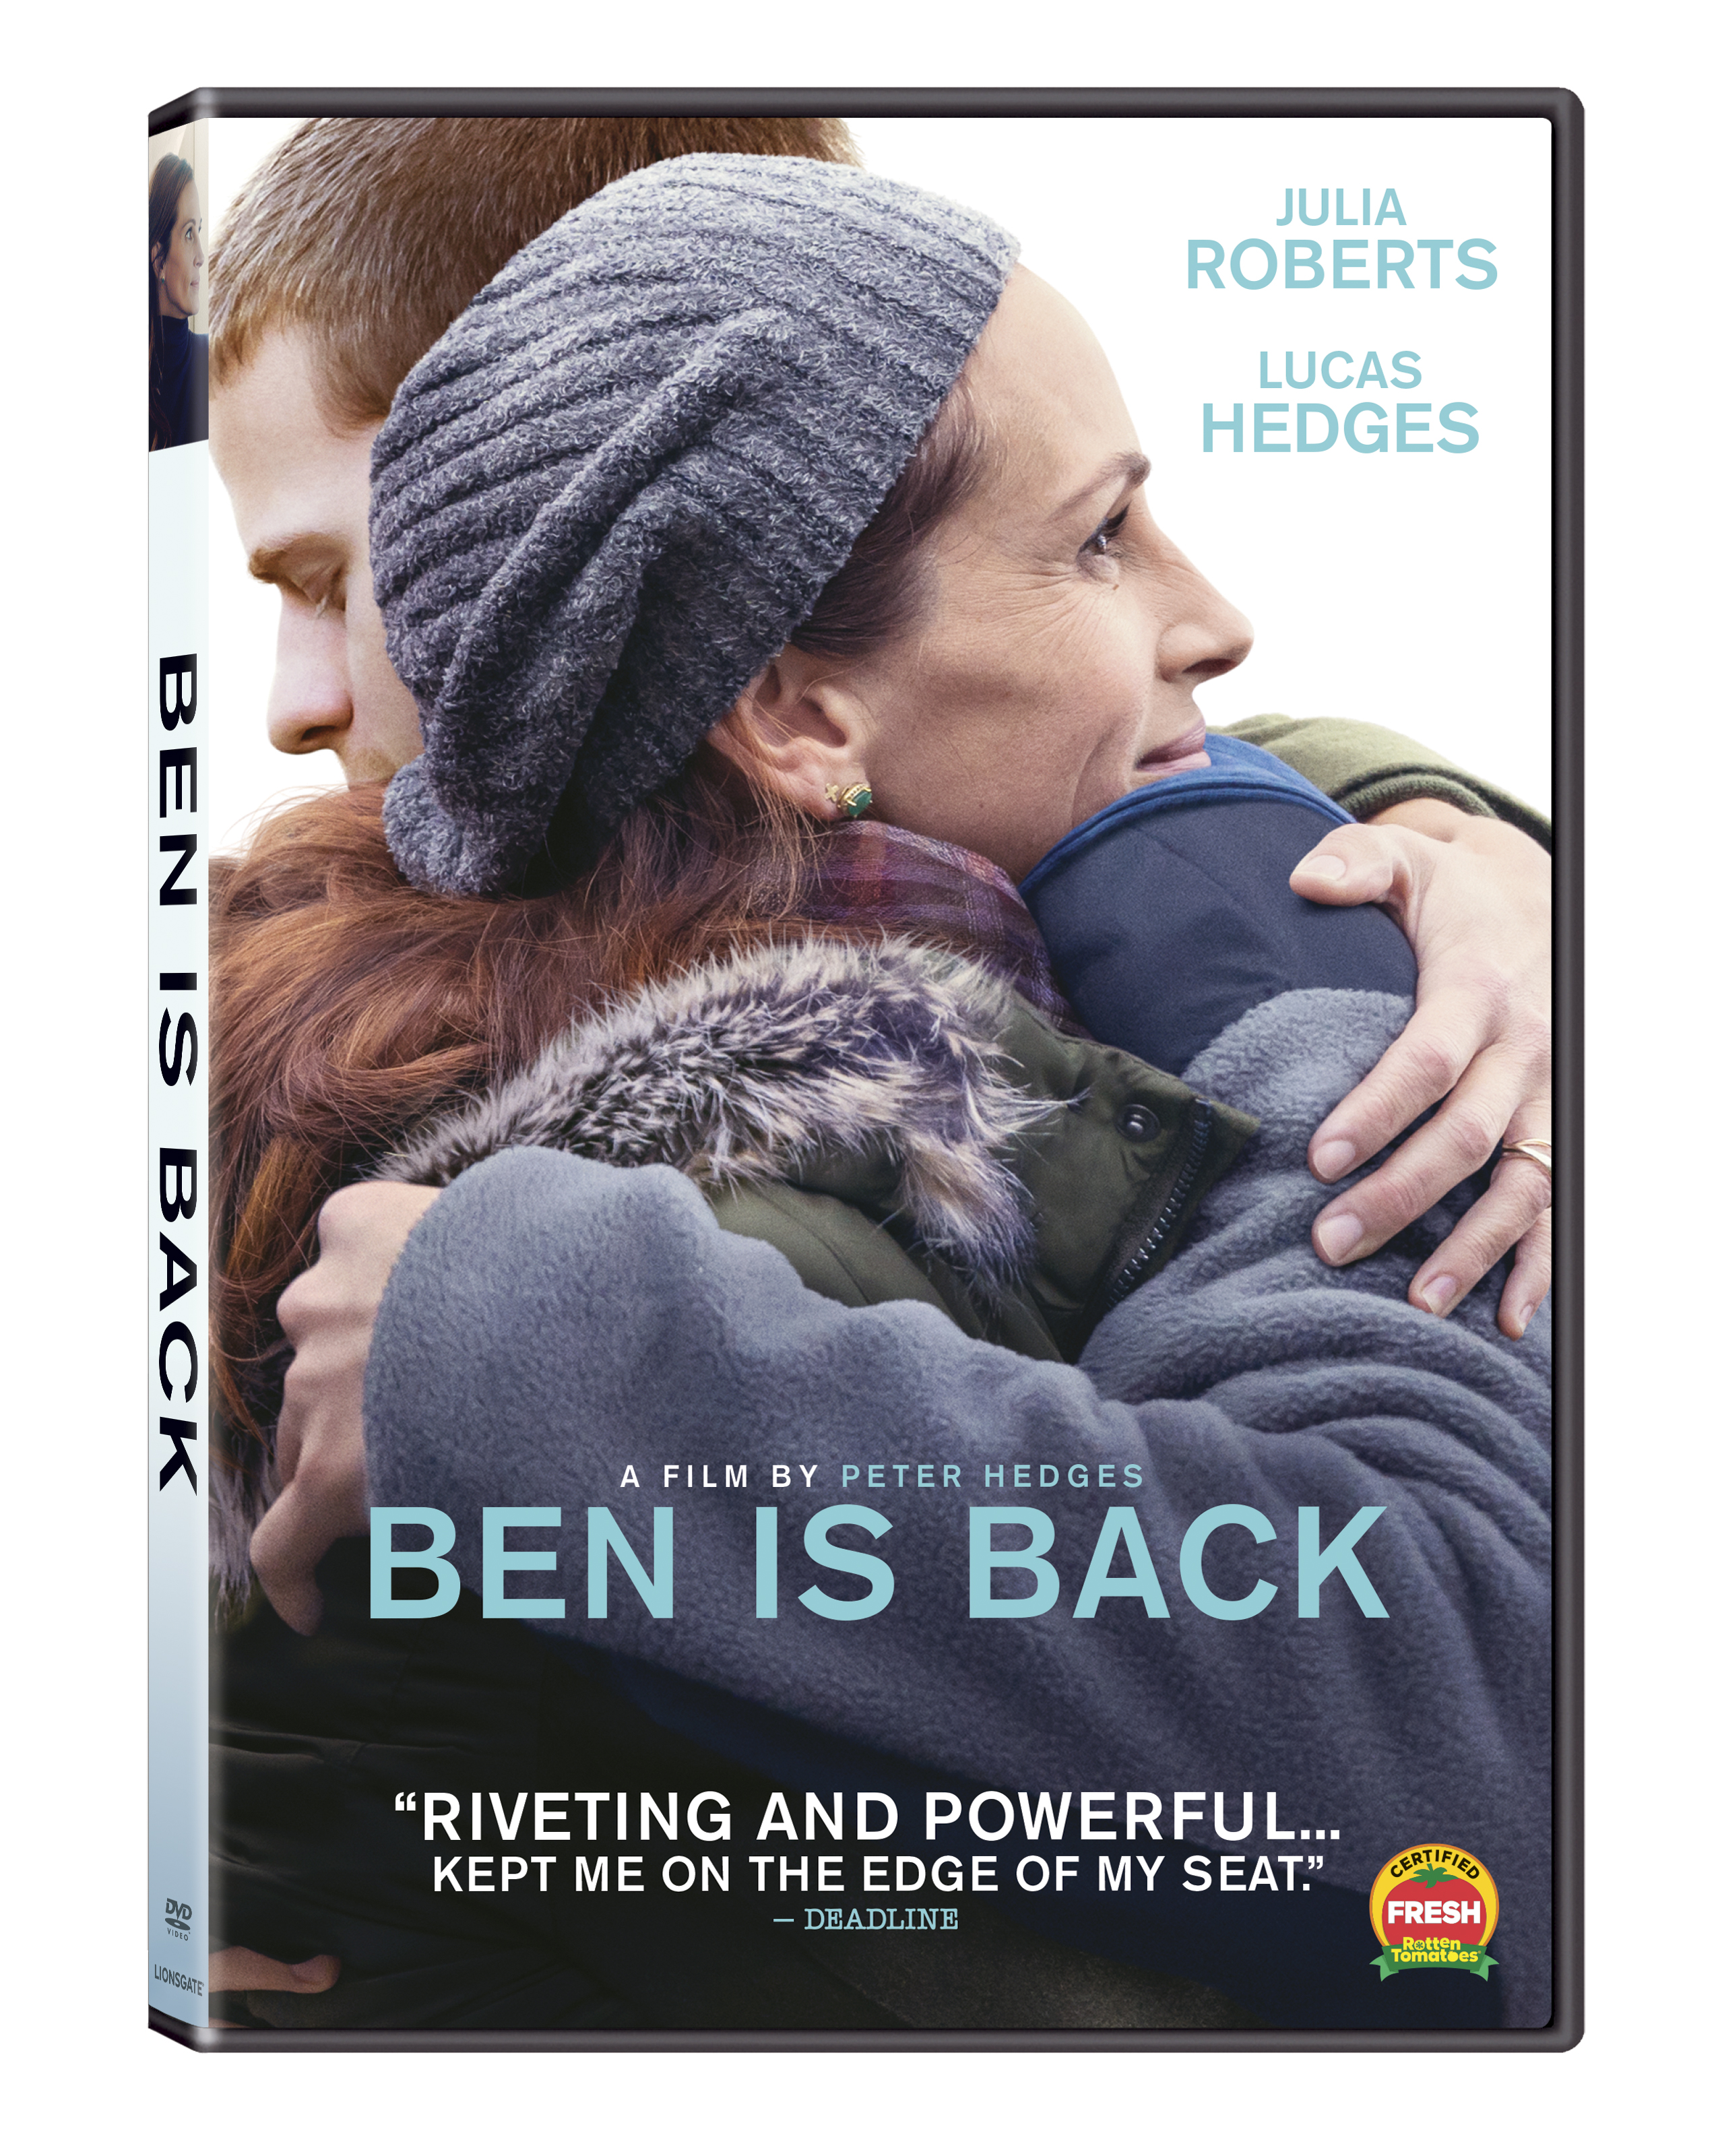 Ben Is Back DVD cover (Lionsgate Home Entertainment)